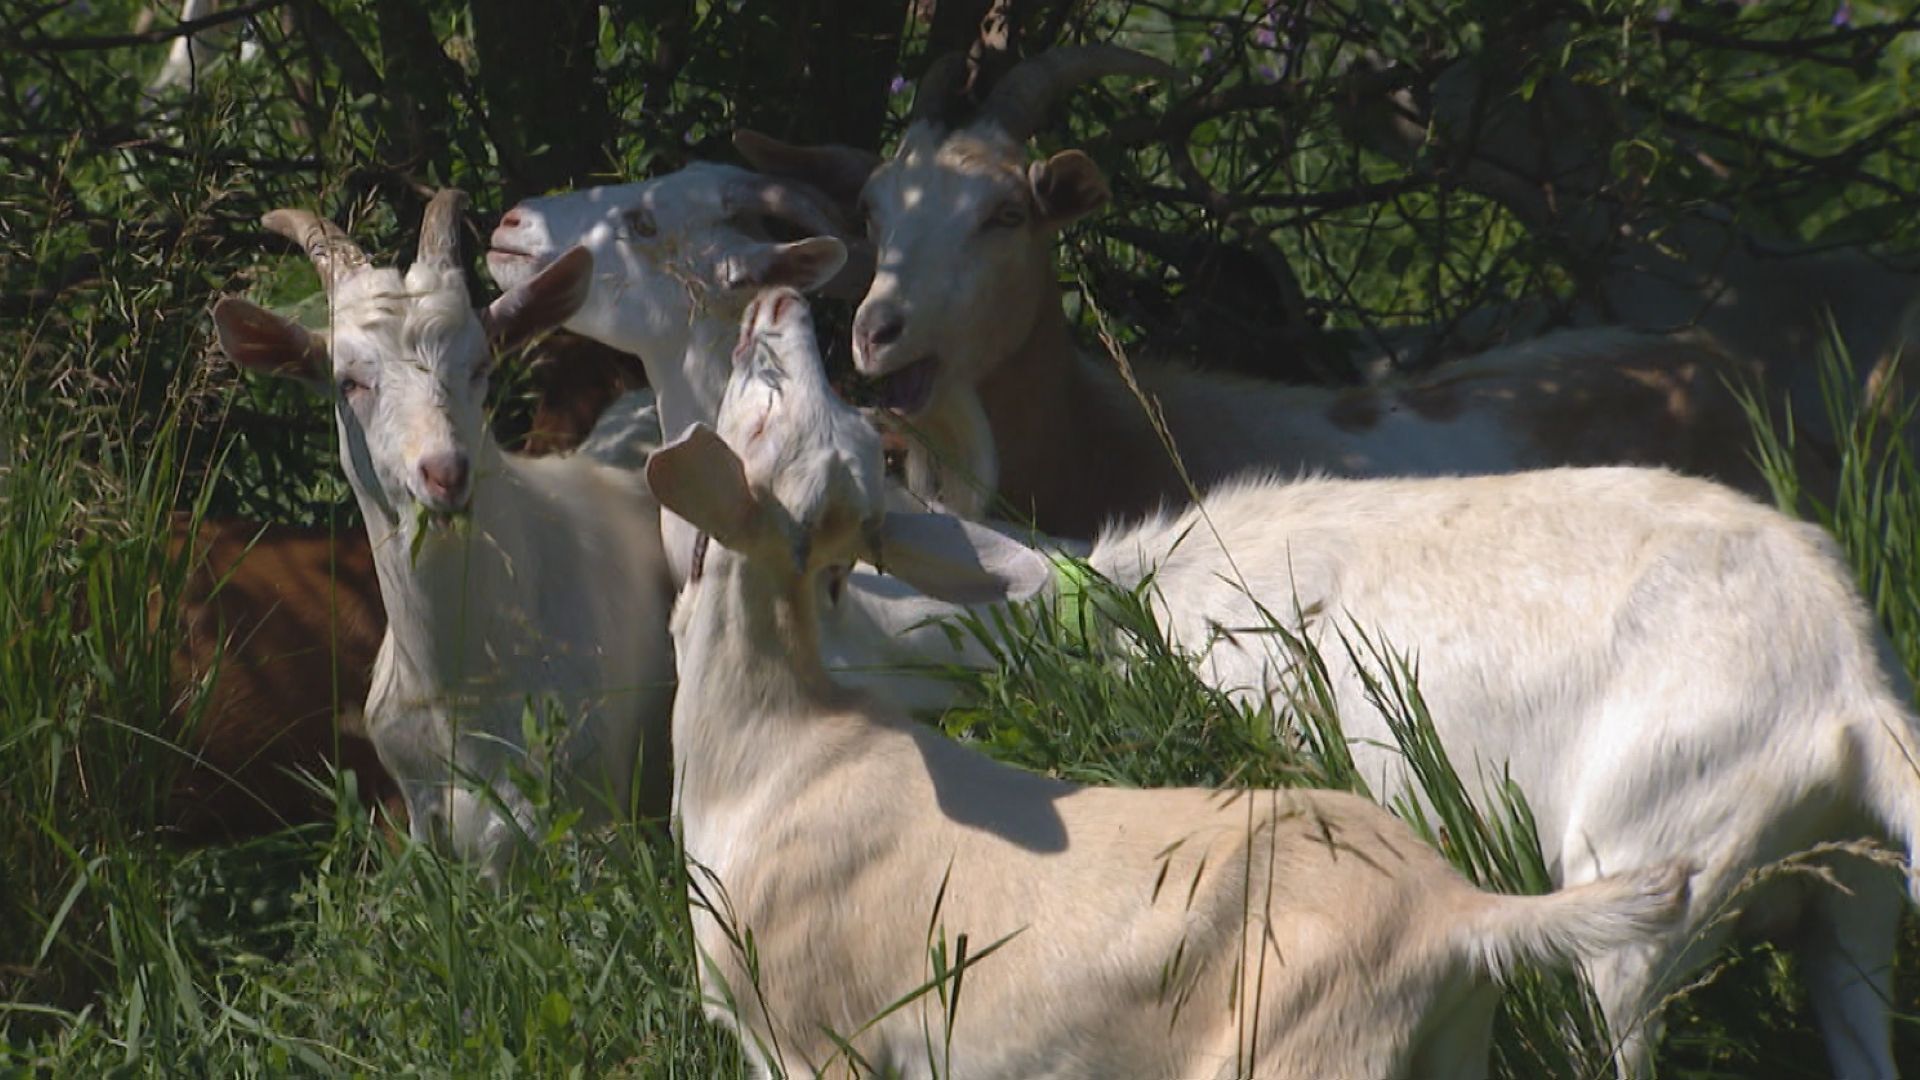 Goats sink their teeth into balancing a local ecosystem